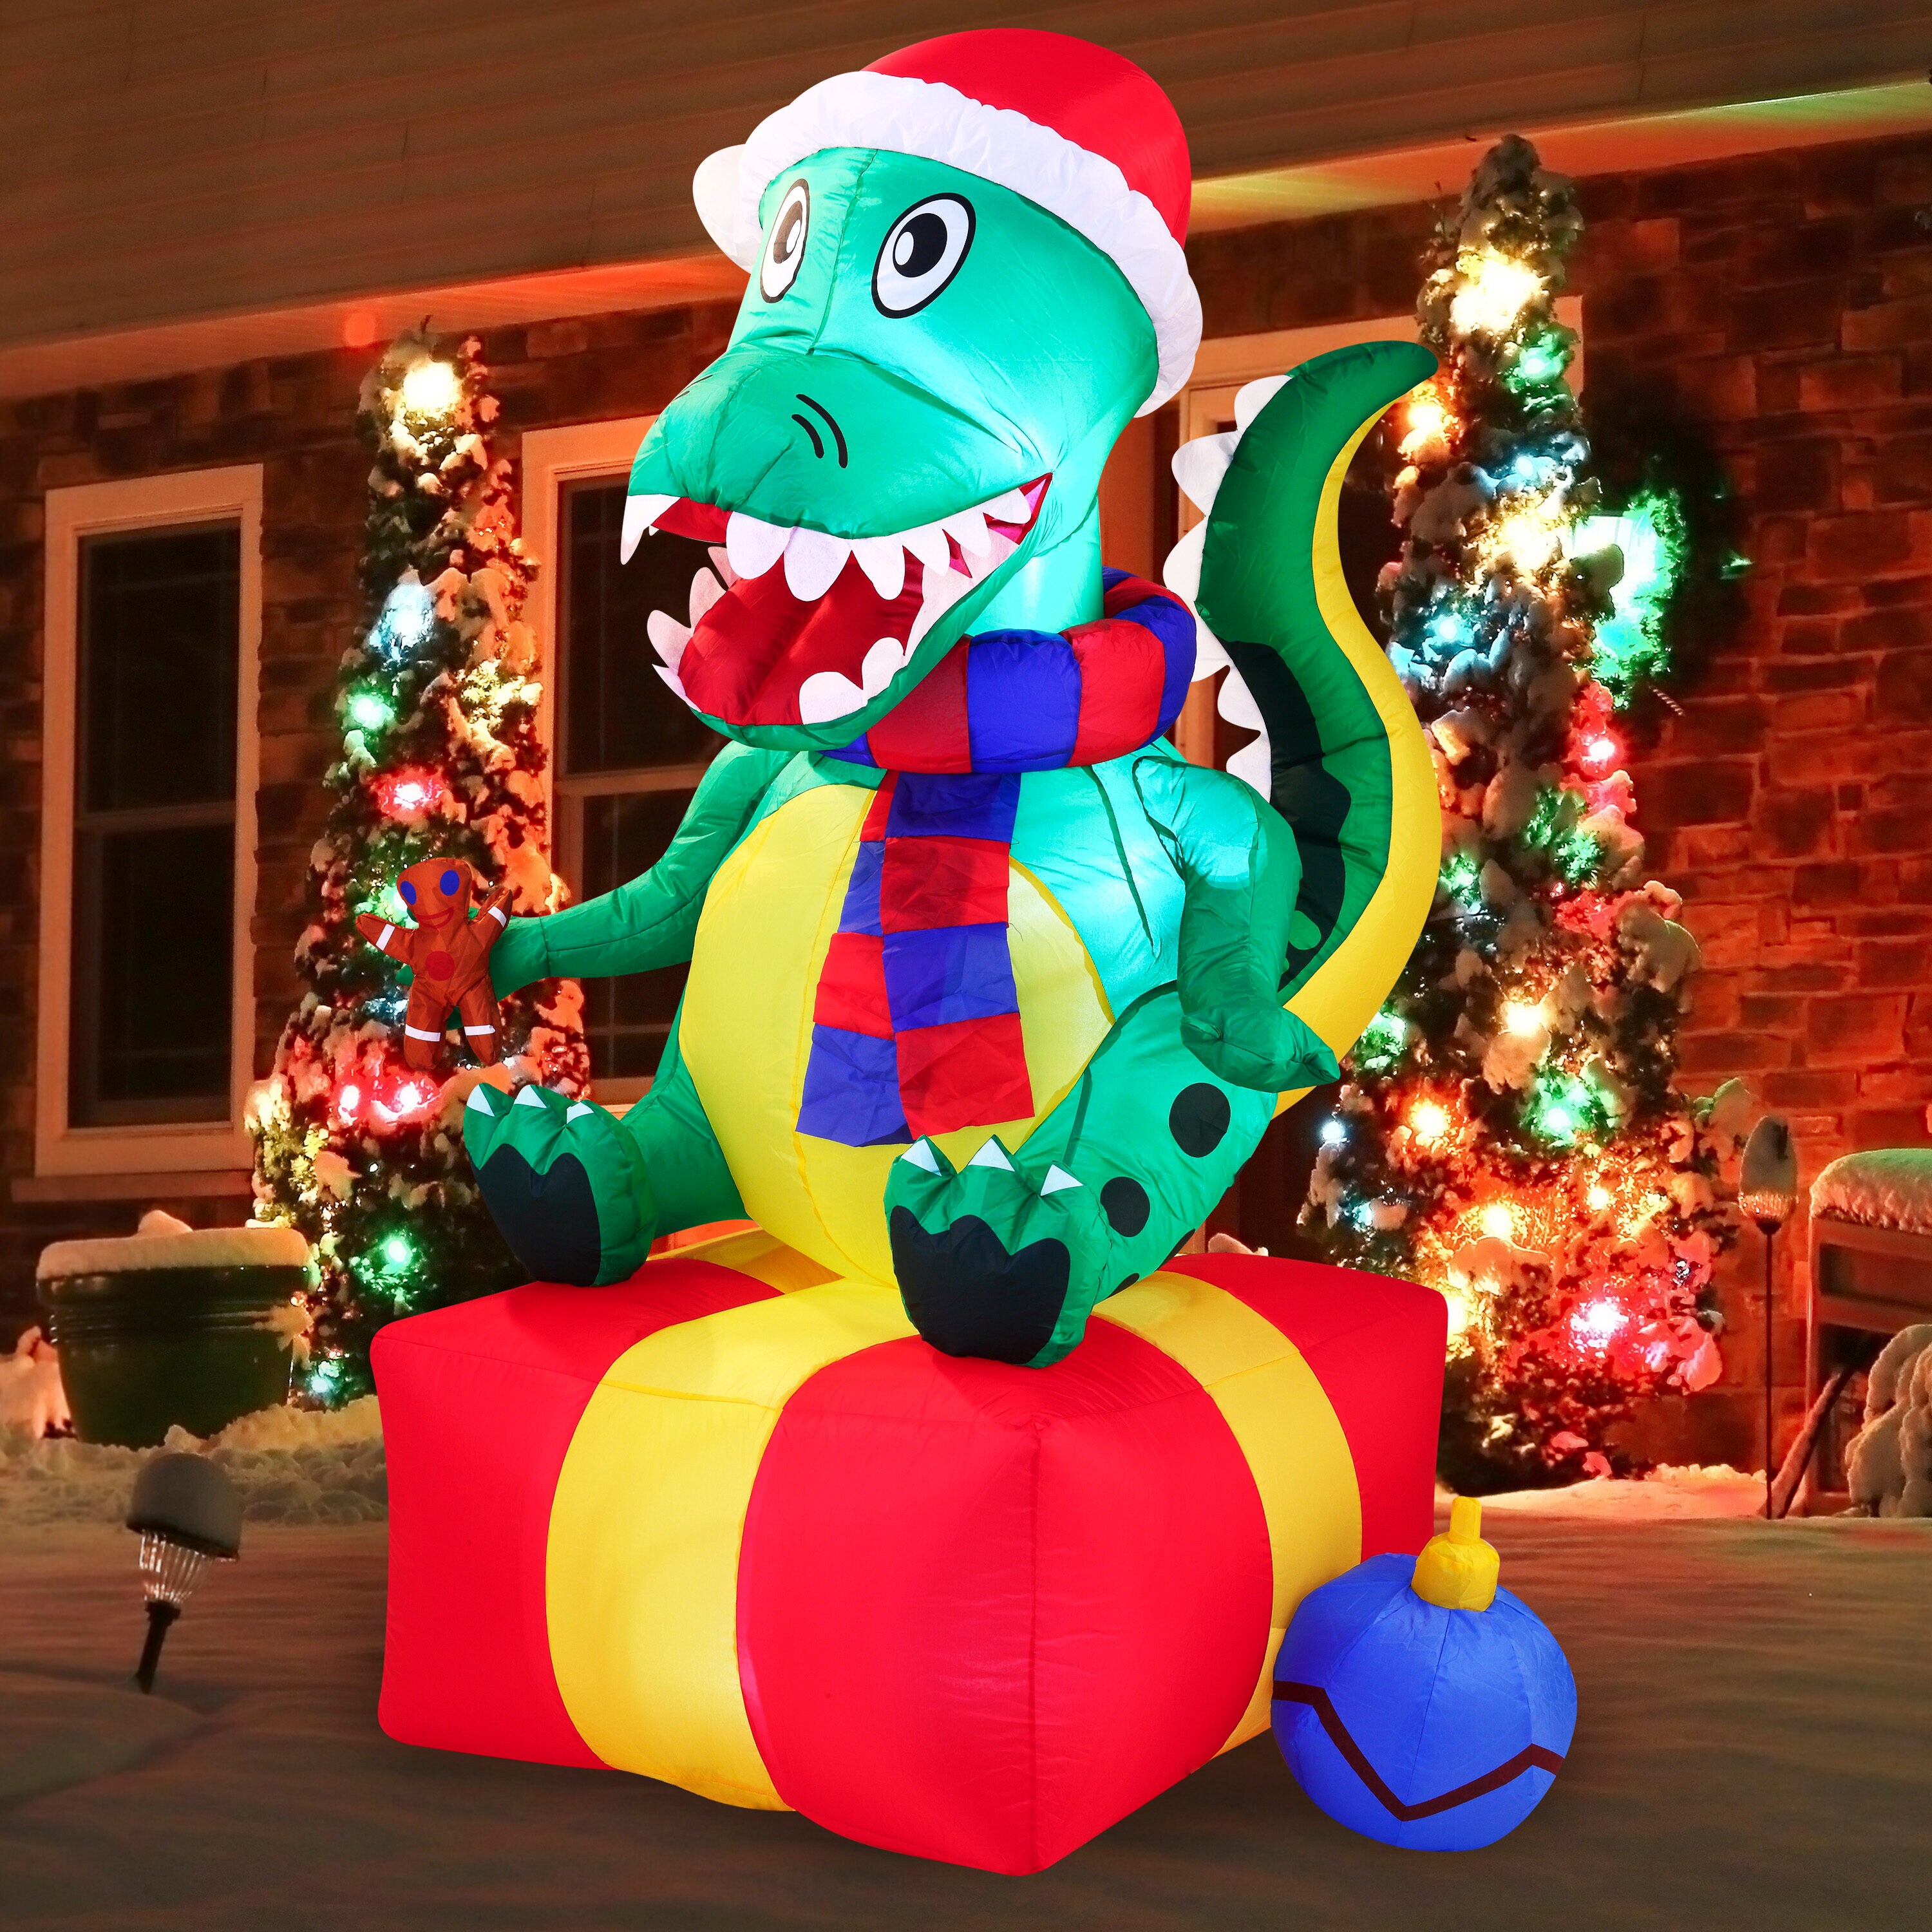 Dinosaur Christmas Inflatables at Lowes.com